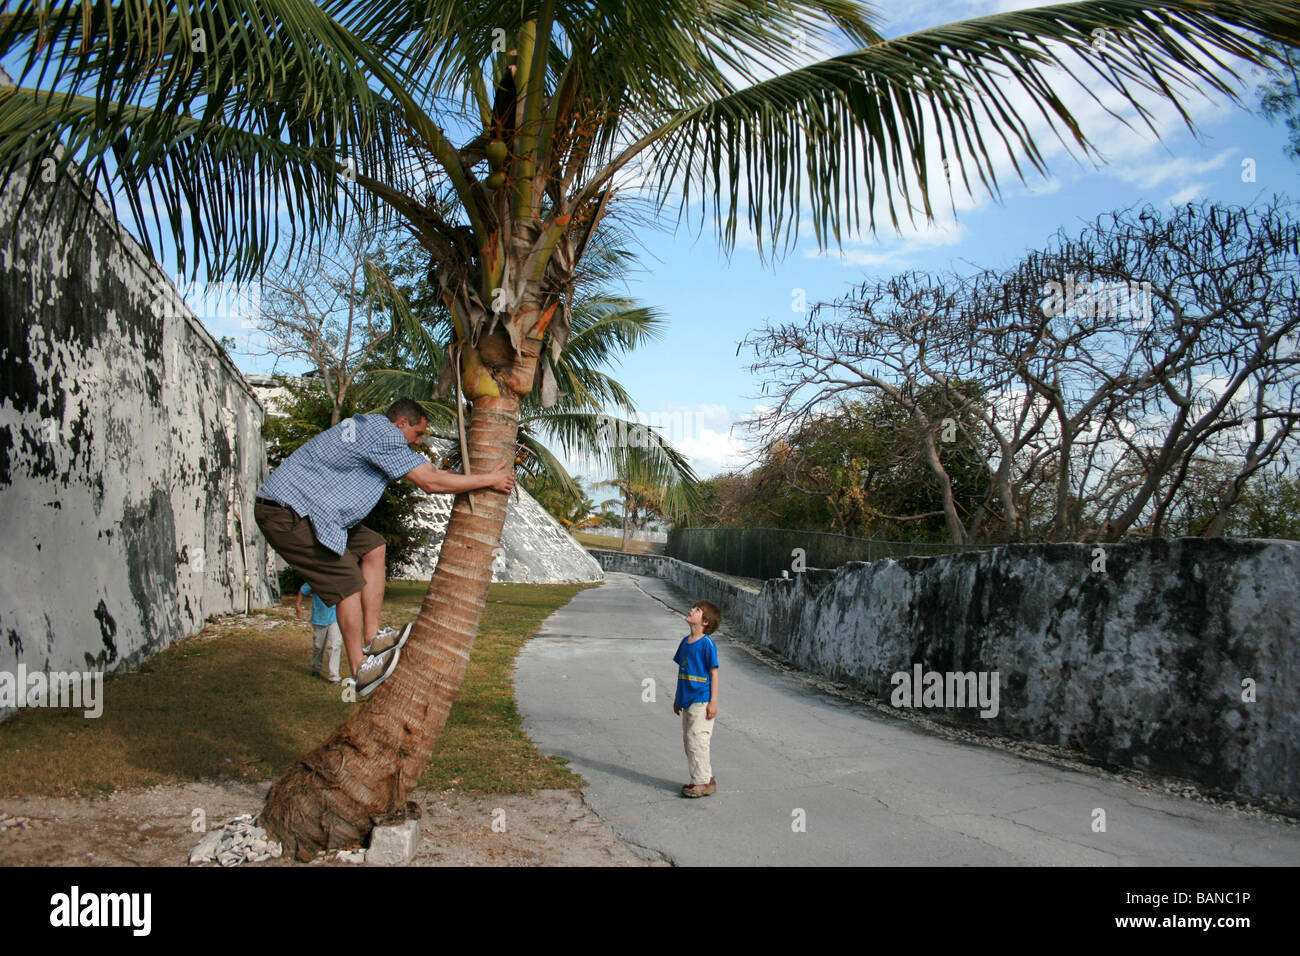 man climbing a tree to pick a coconut for his son, who is watching from below, The Bahamas Stock Photo